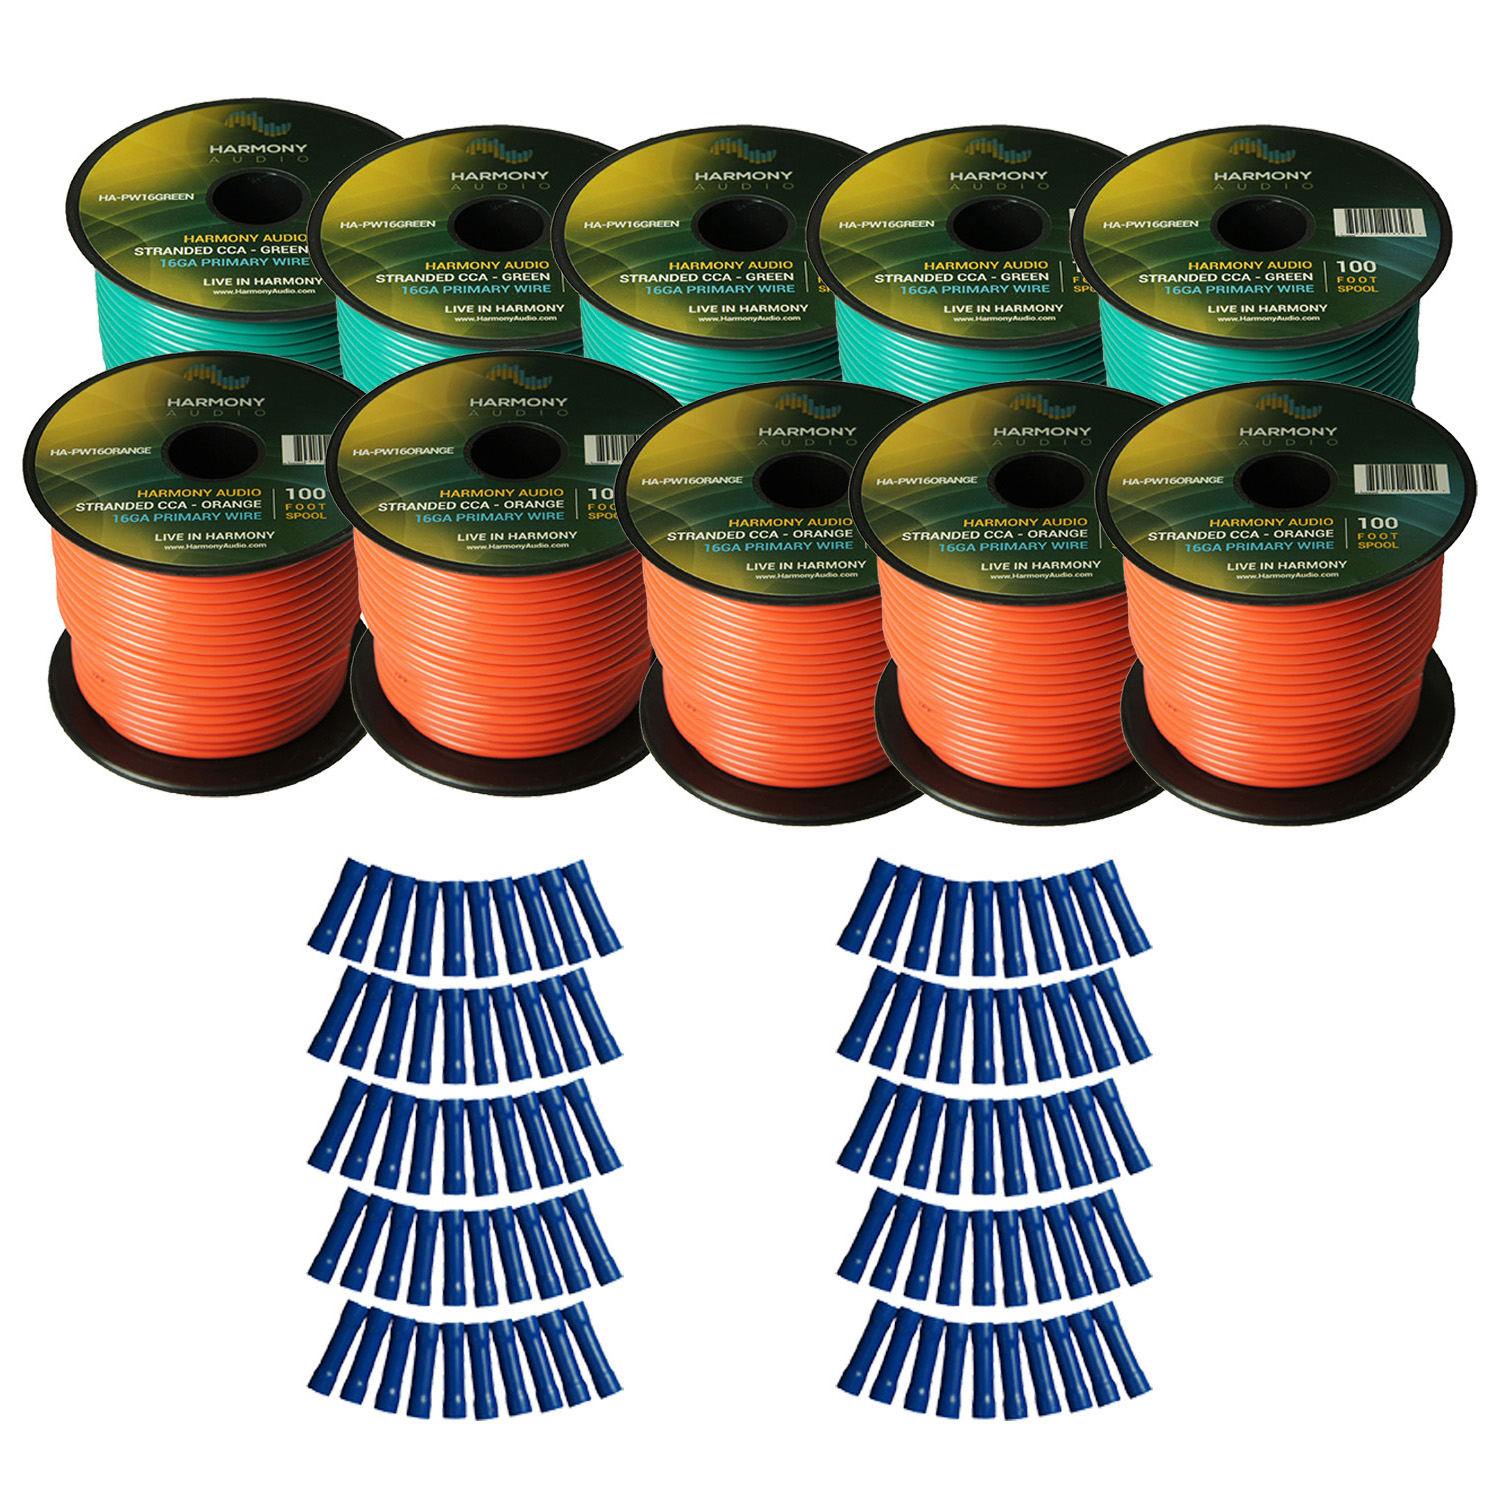 Harmony Audio Primary Single Conductor 16 Gauge Power or Ground Wire - 10 Rolls - 1000 Feet - Green & Orange for Car Audio / Trailer / Model Train / Remote